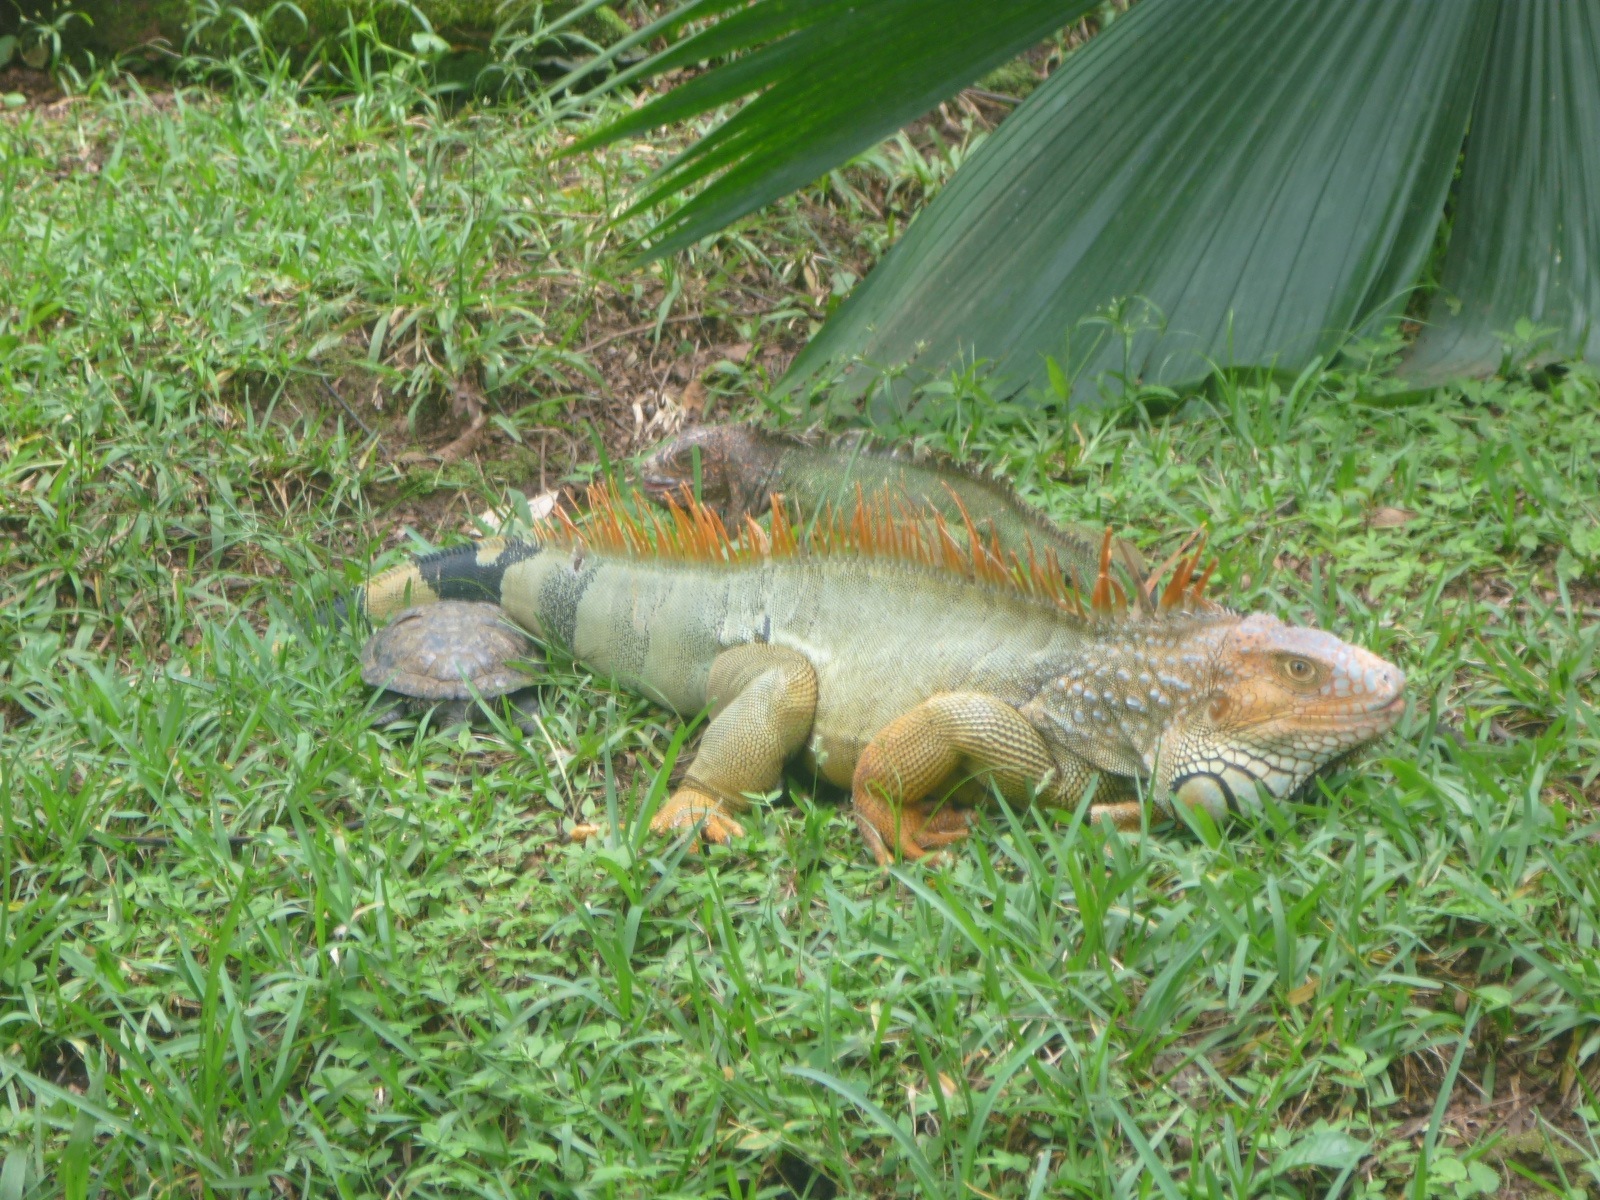 Backpacking in Costa Rica: World of Snakes, Grecia and Rescate Wildlife ...